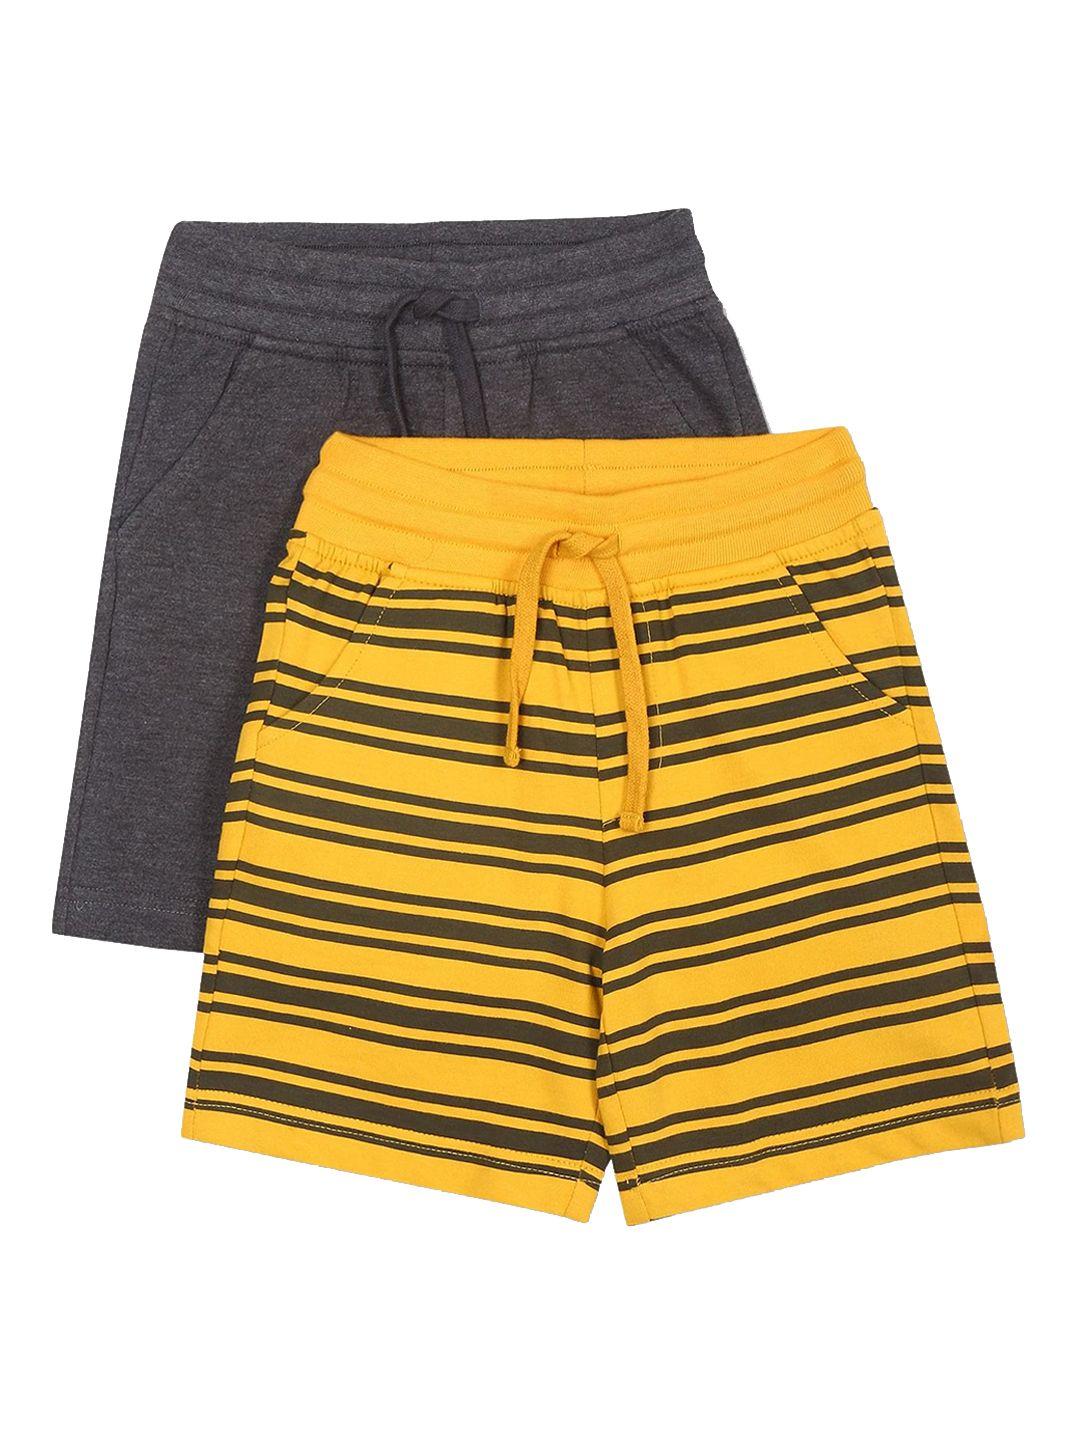 cherokee boys assorted set of 2 striped shorts